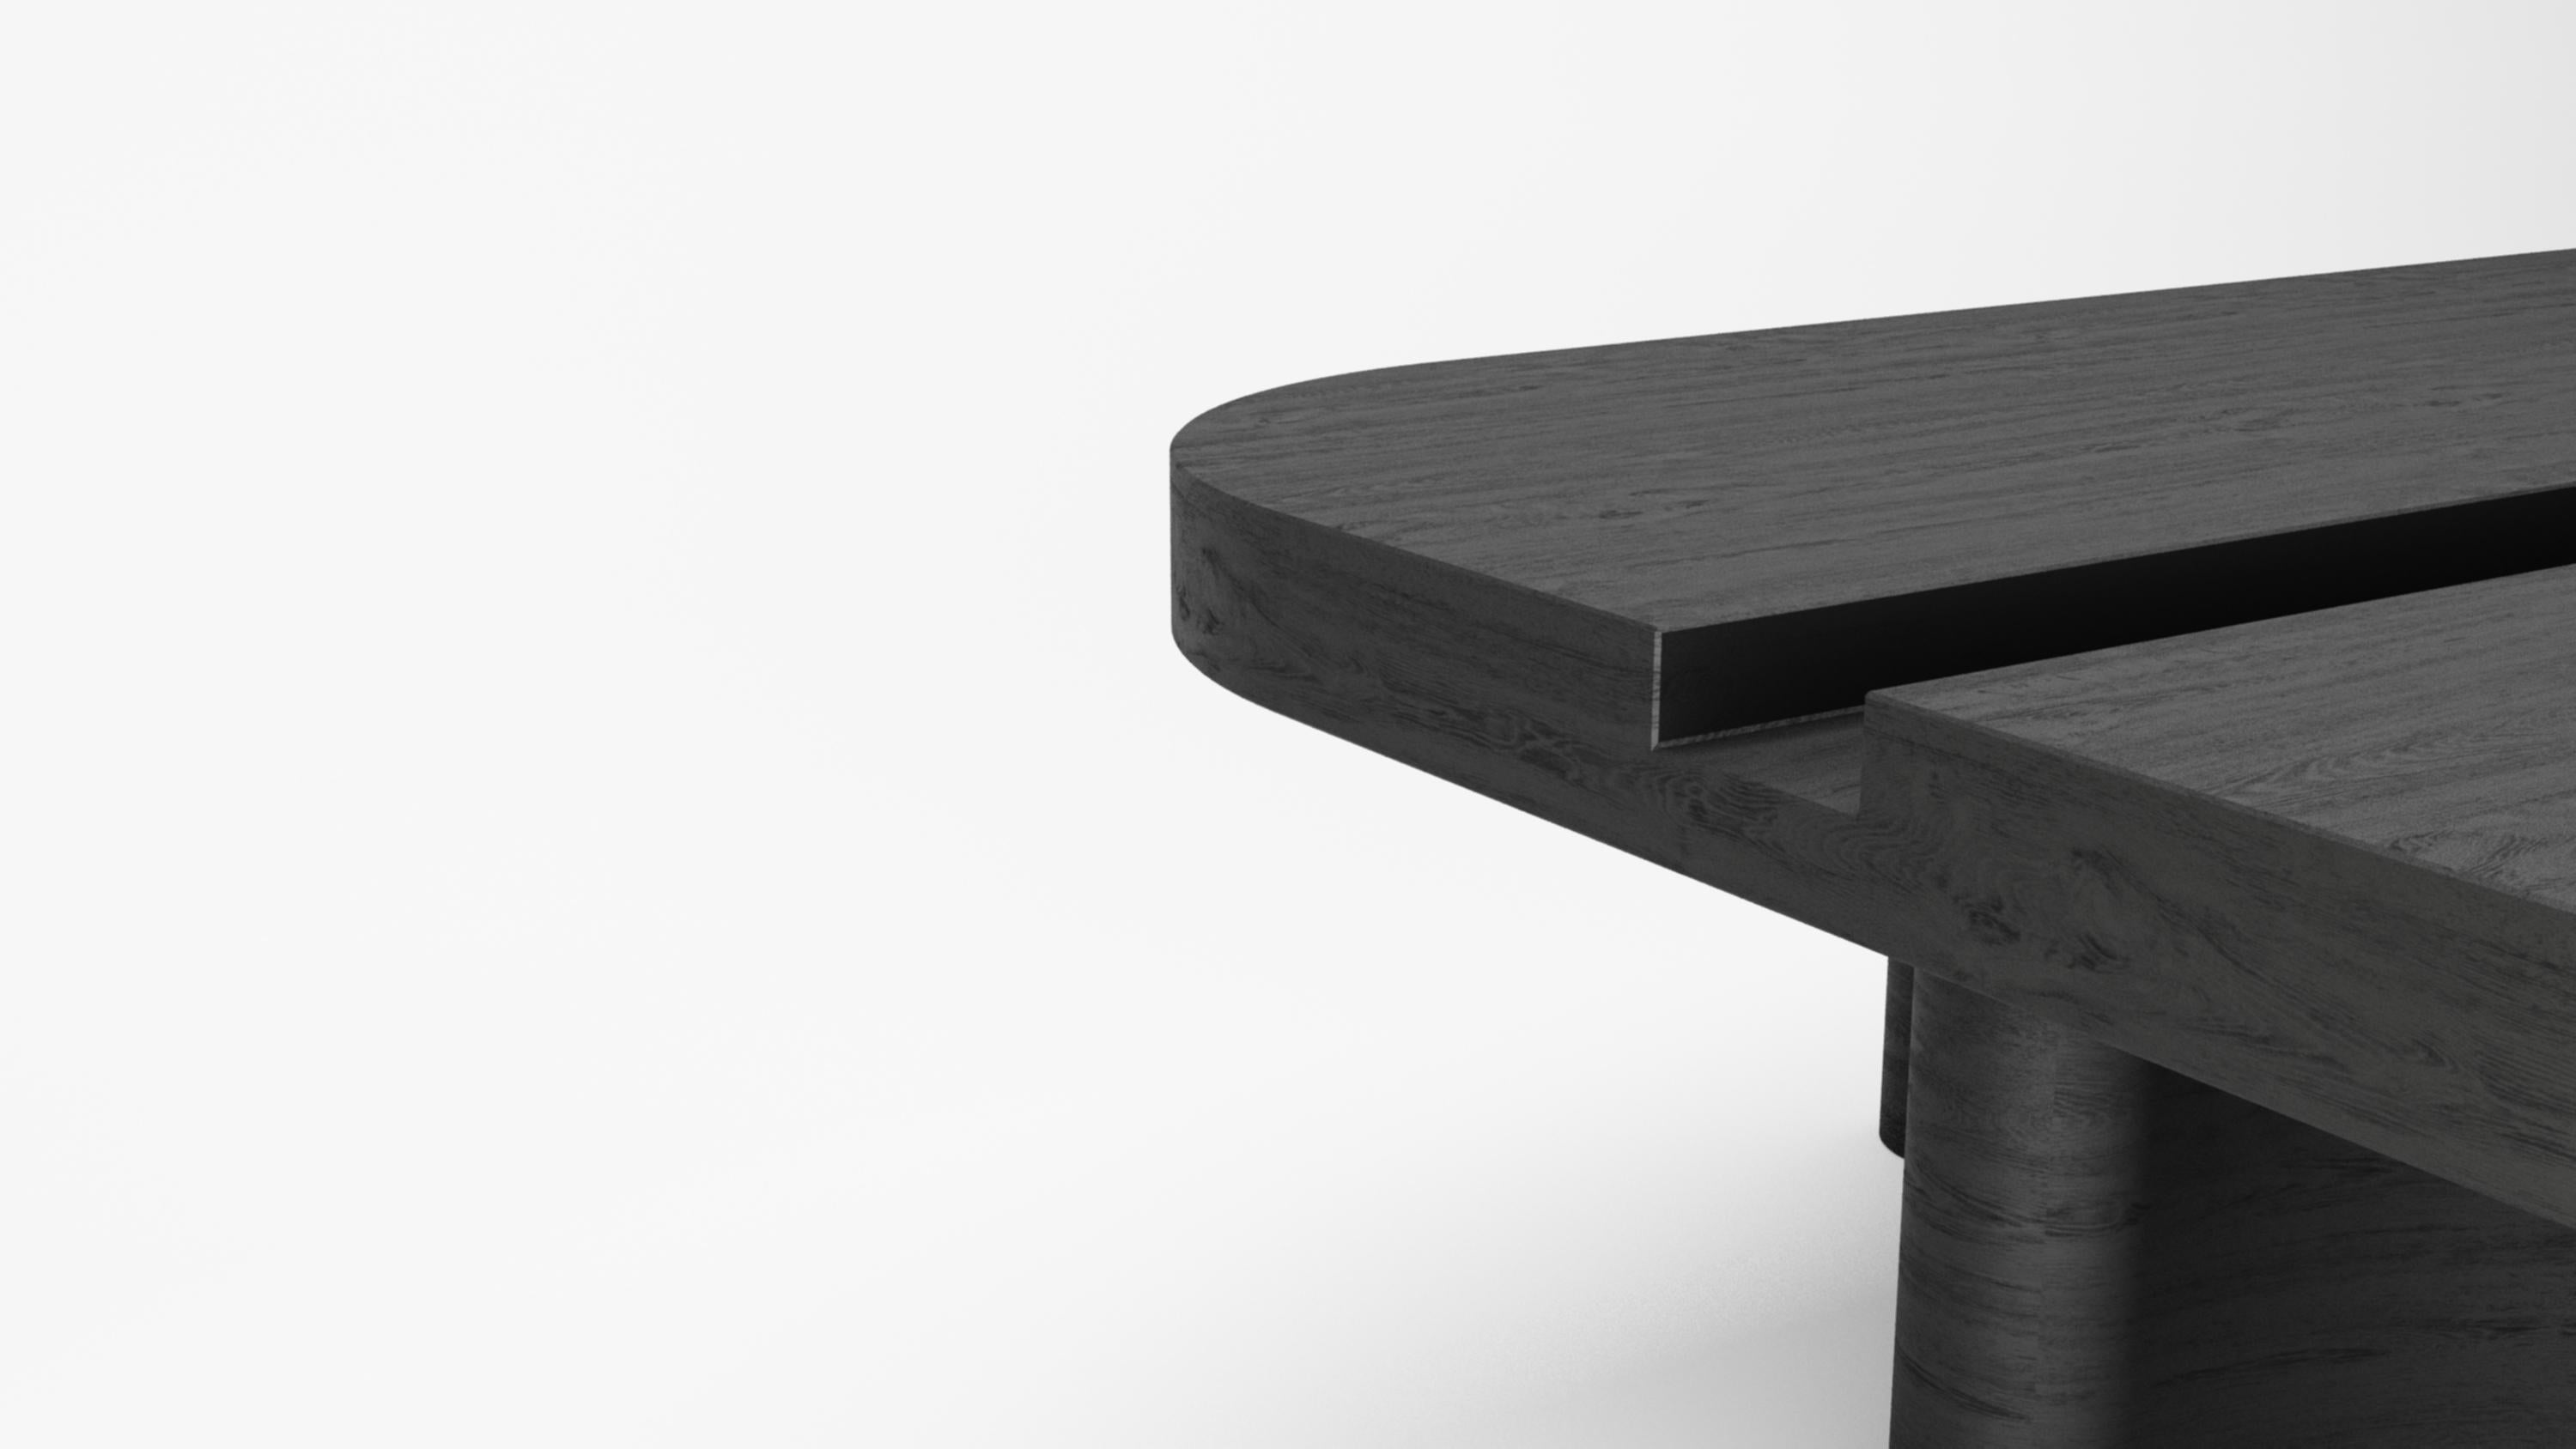 Collector - Designed by Studio Rig Riviera Center Table Black Oak

Collector brand was born and Portugal and aims to be part of daily life by fusing furniture to home routines and lifestyles. The company designs its pieces with the intention to